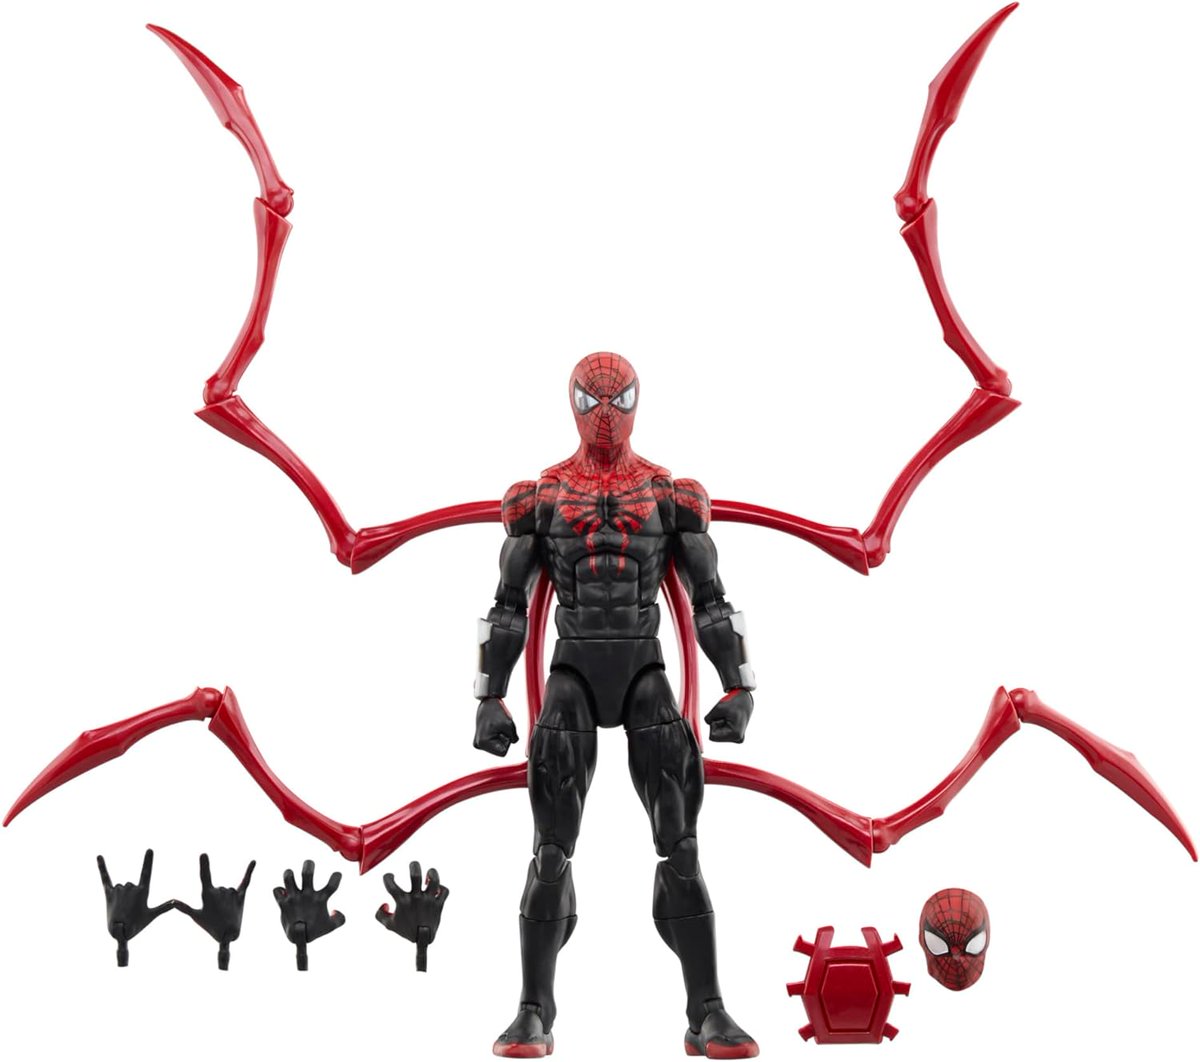 Marvel Legends Series Superior Spider-Man ($29.99) is back up for preorder on Amazon - amzn.to/3w8T4K7

#MARVELLEGENDS #ad